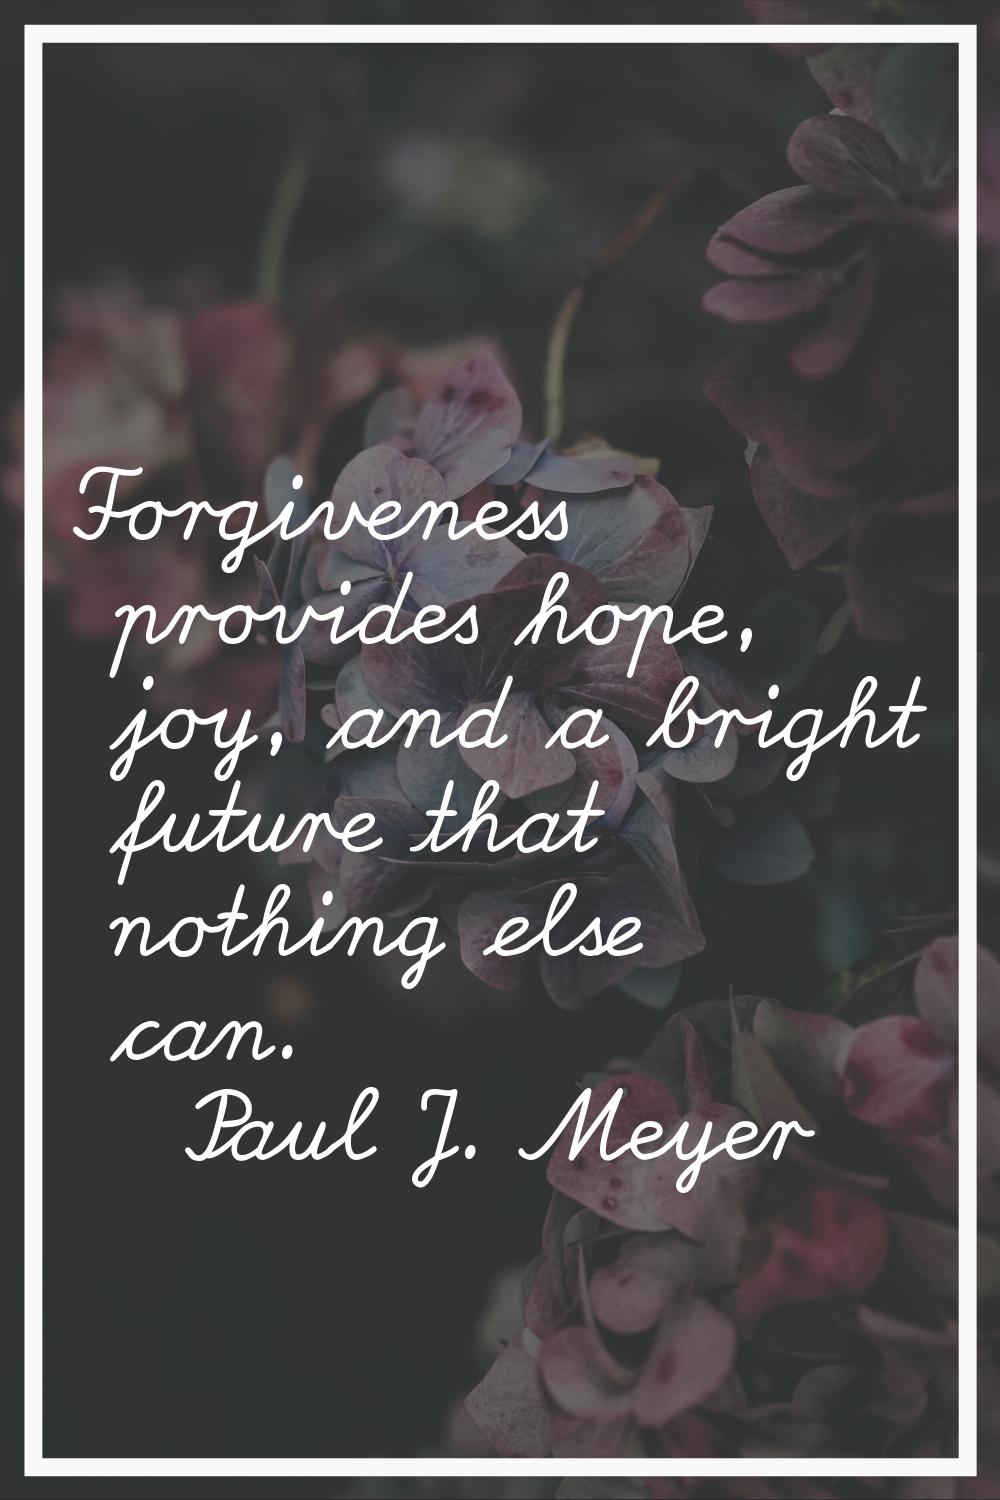 Forgiveness provides hope, joy, and a bright future that nothing else can.